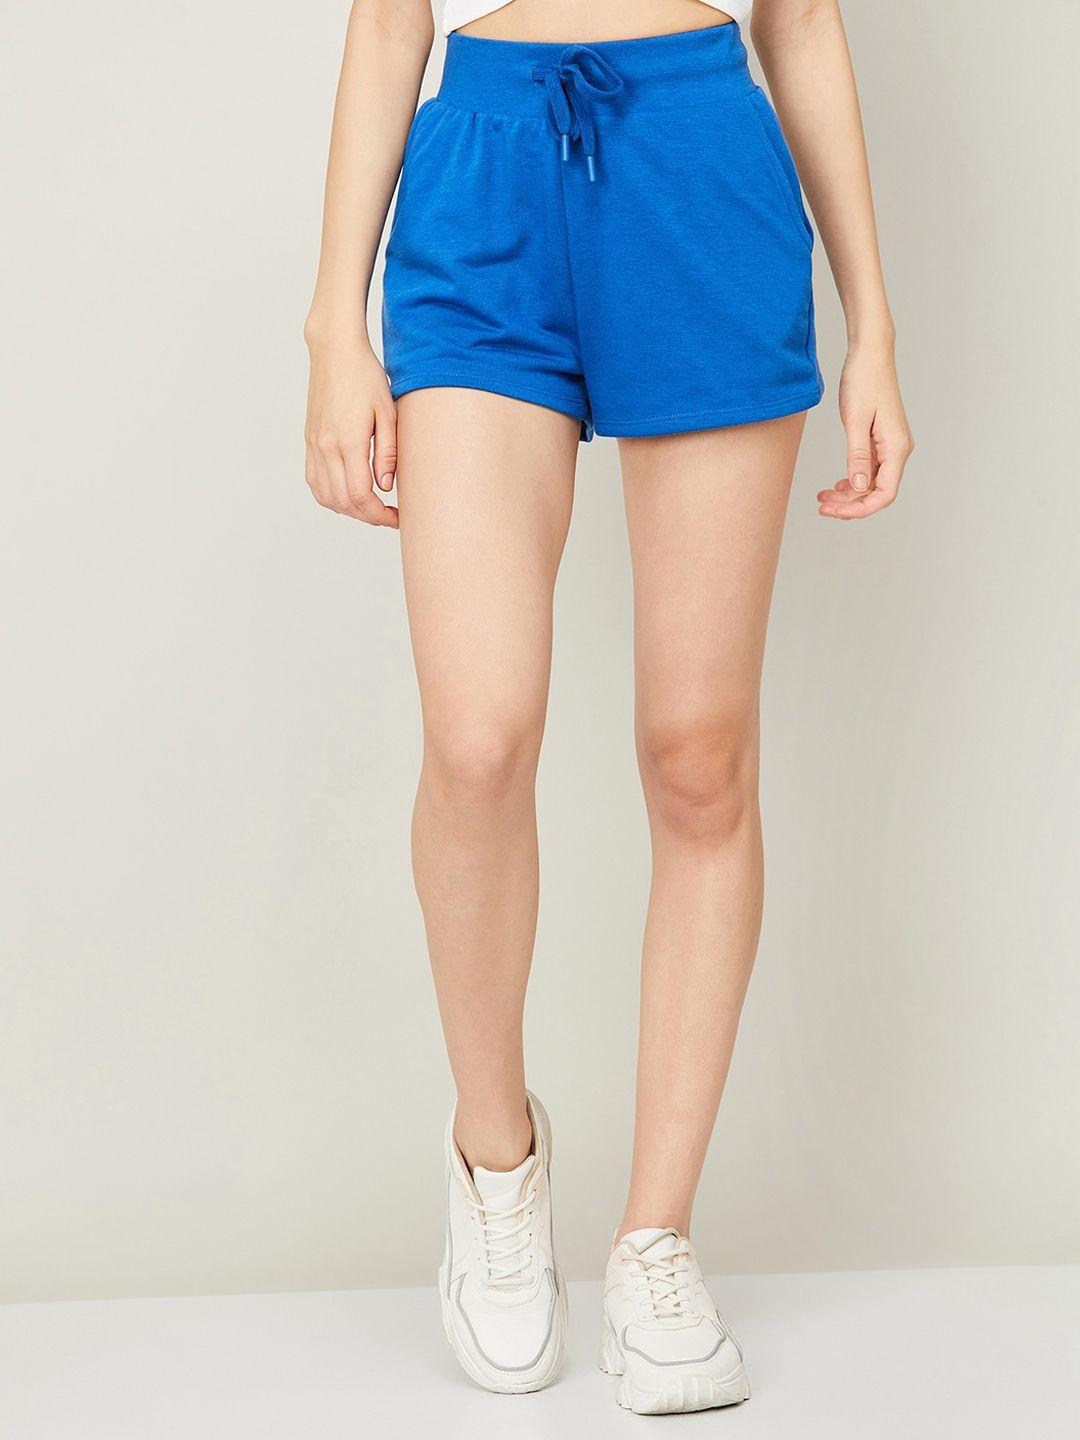 ginger-by-lifestyle-women-cotton-mid-rise-regular-fit-shorts